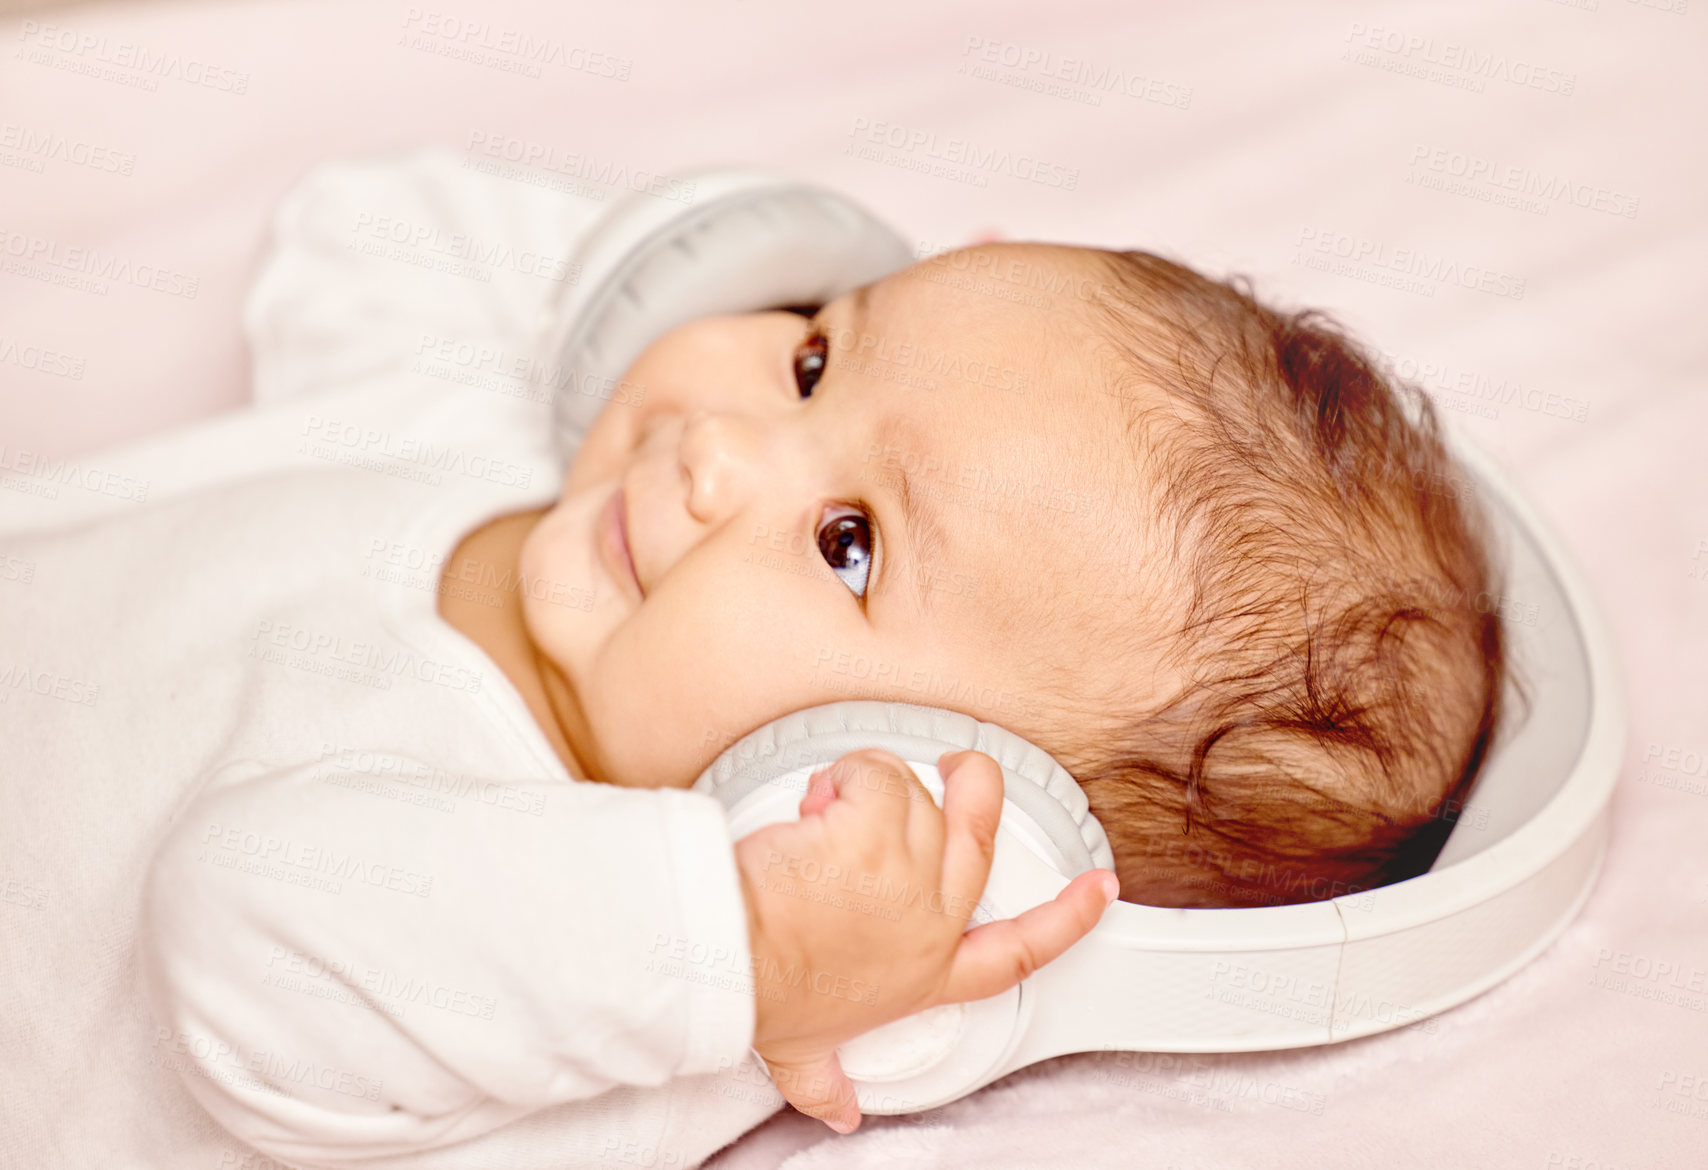 Buy stock photo Shot of a little baby lying down while wearing headphones